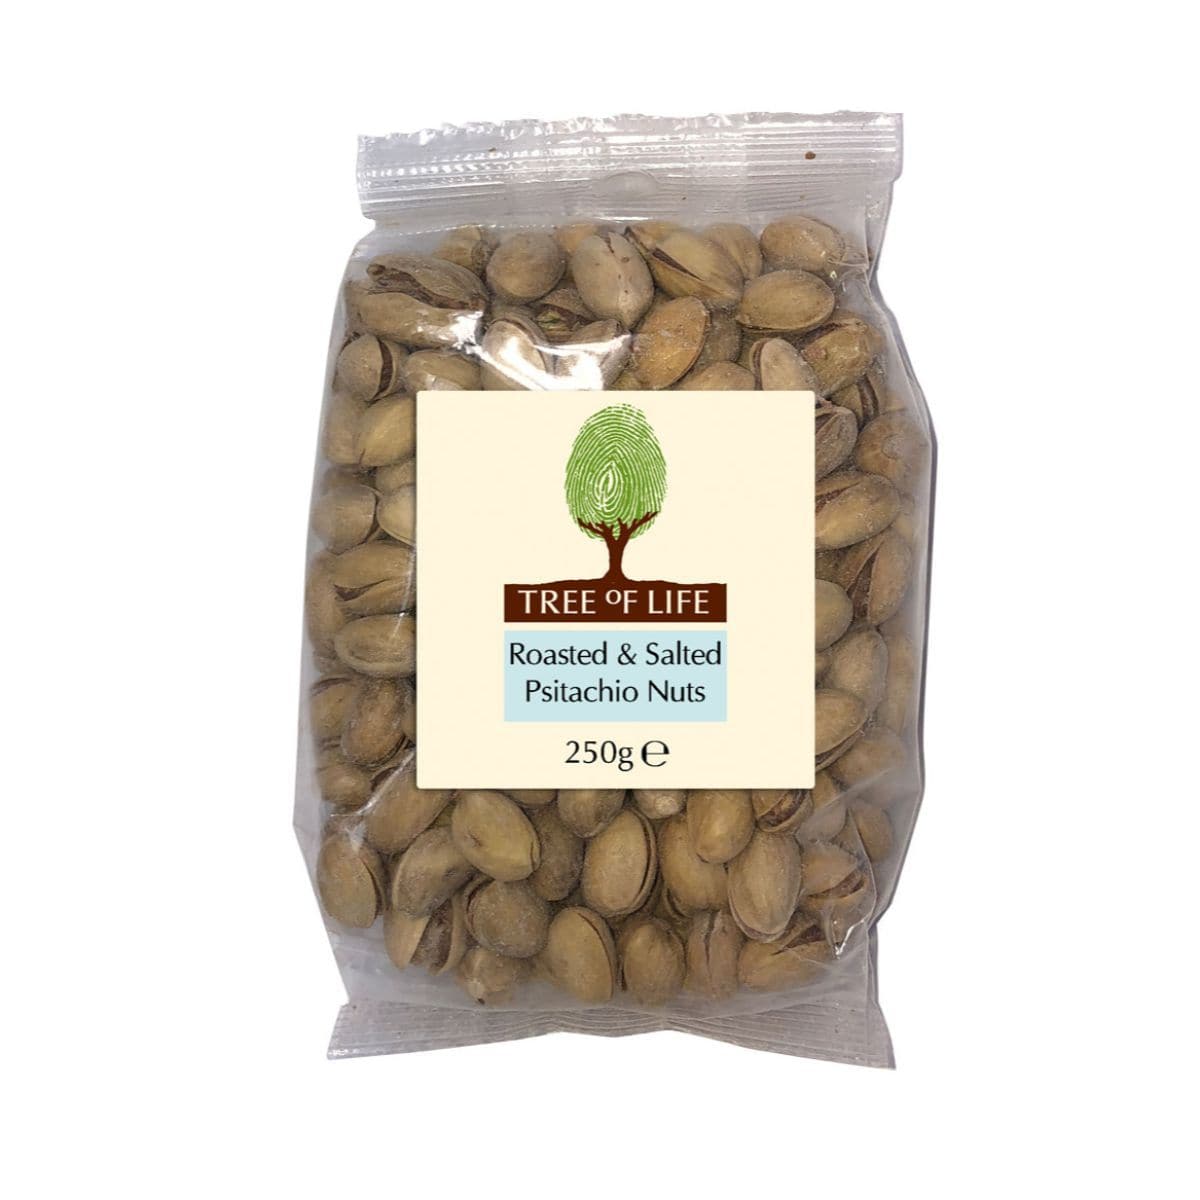 Tree of Life Pistachio Nuts - Roasted & Salted 250g